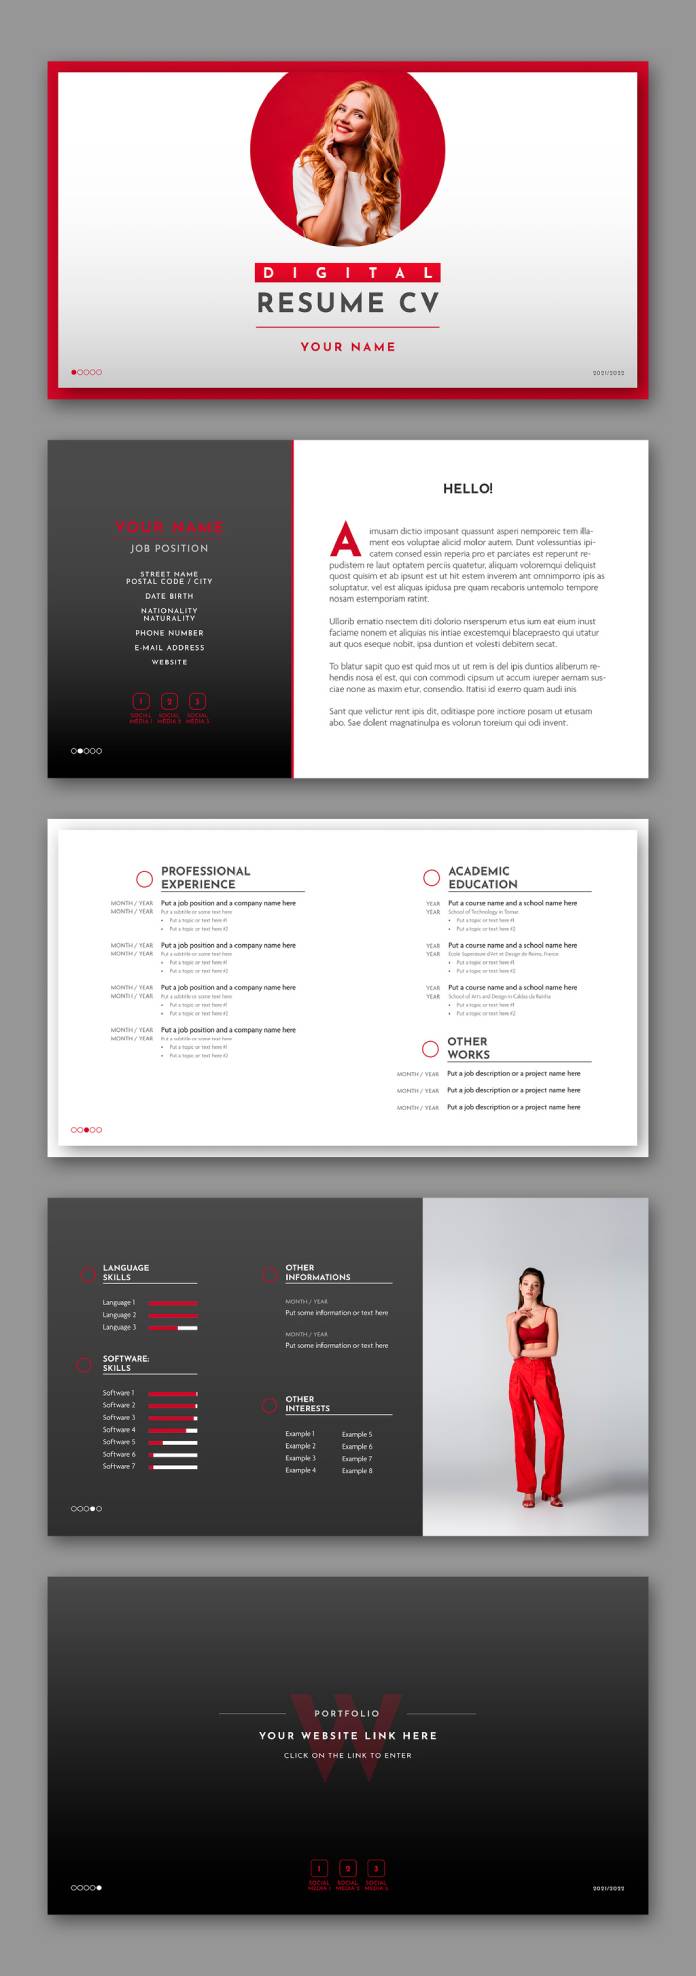 Interactive PDF Resume Template for Adobe InDesign by Tom Sarraipo